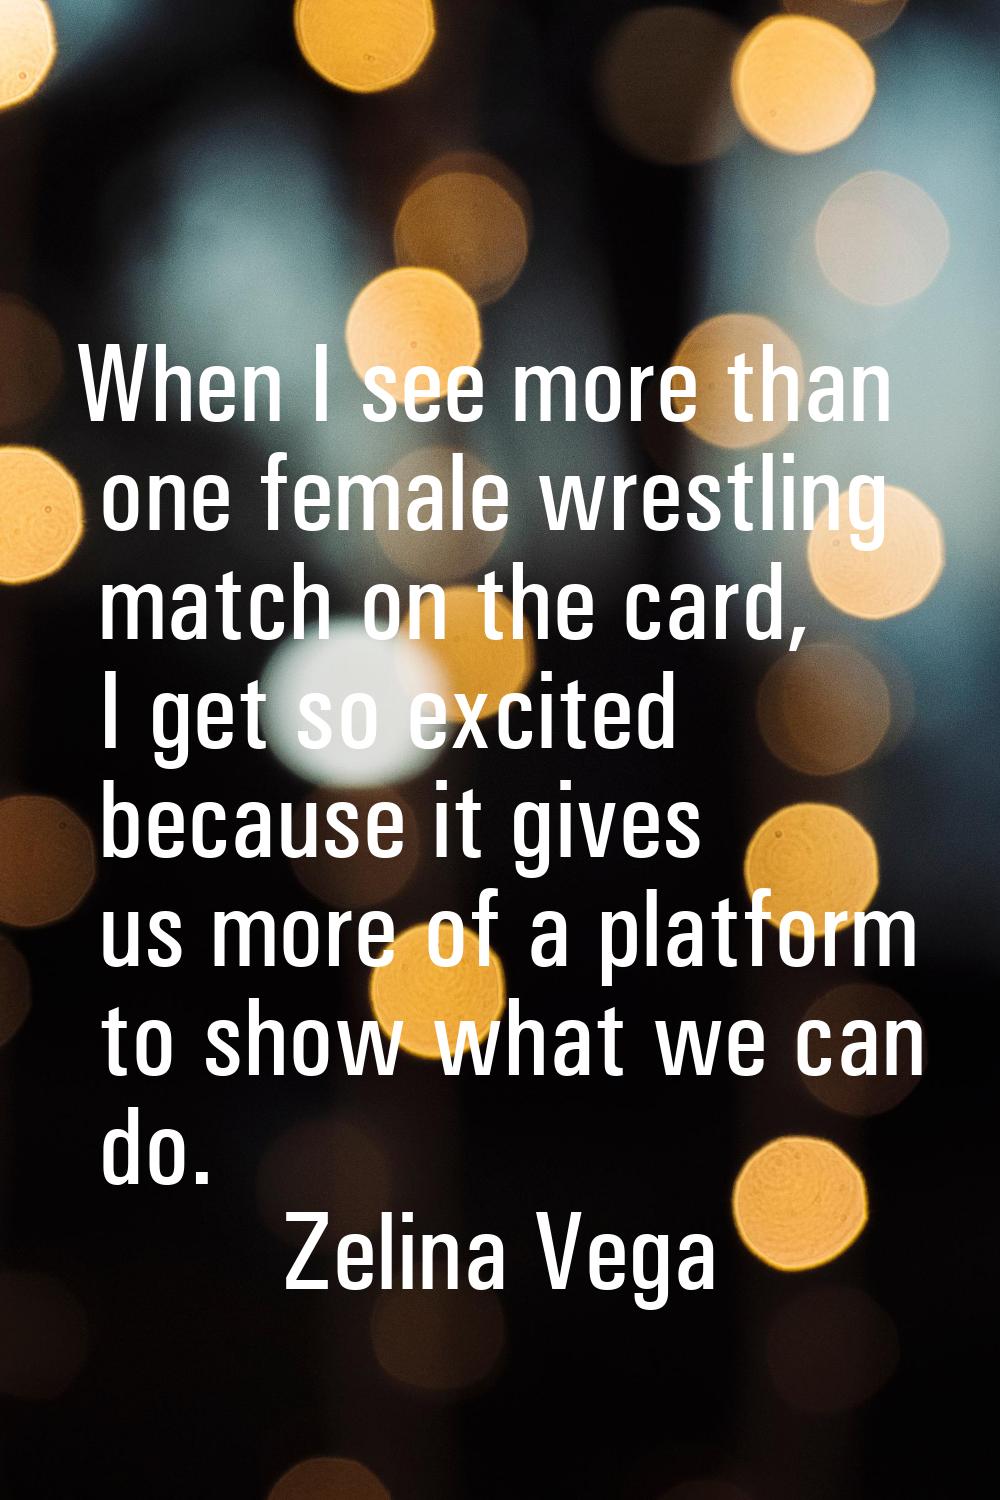 When I see more than one female wrestling match on the card, I get so excited because it gives us m